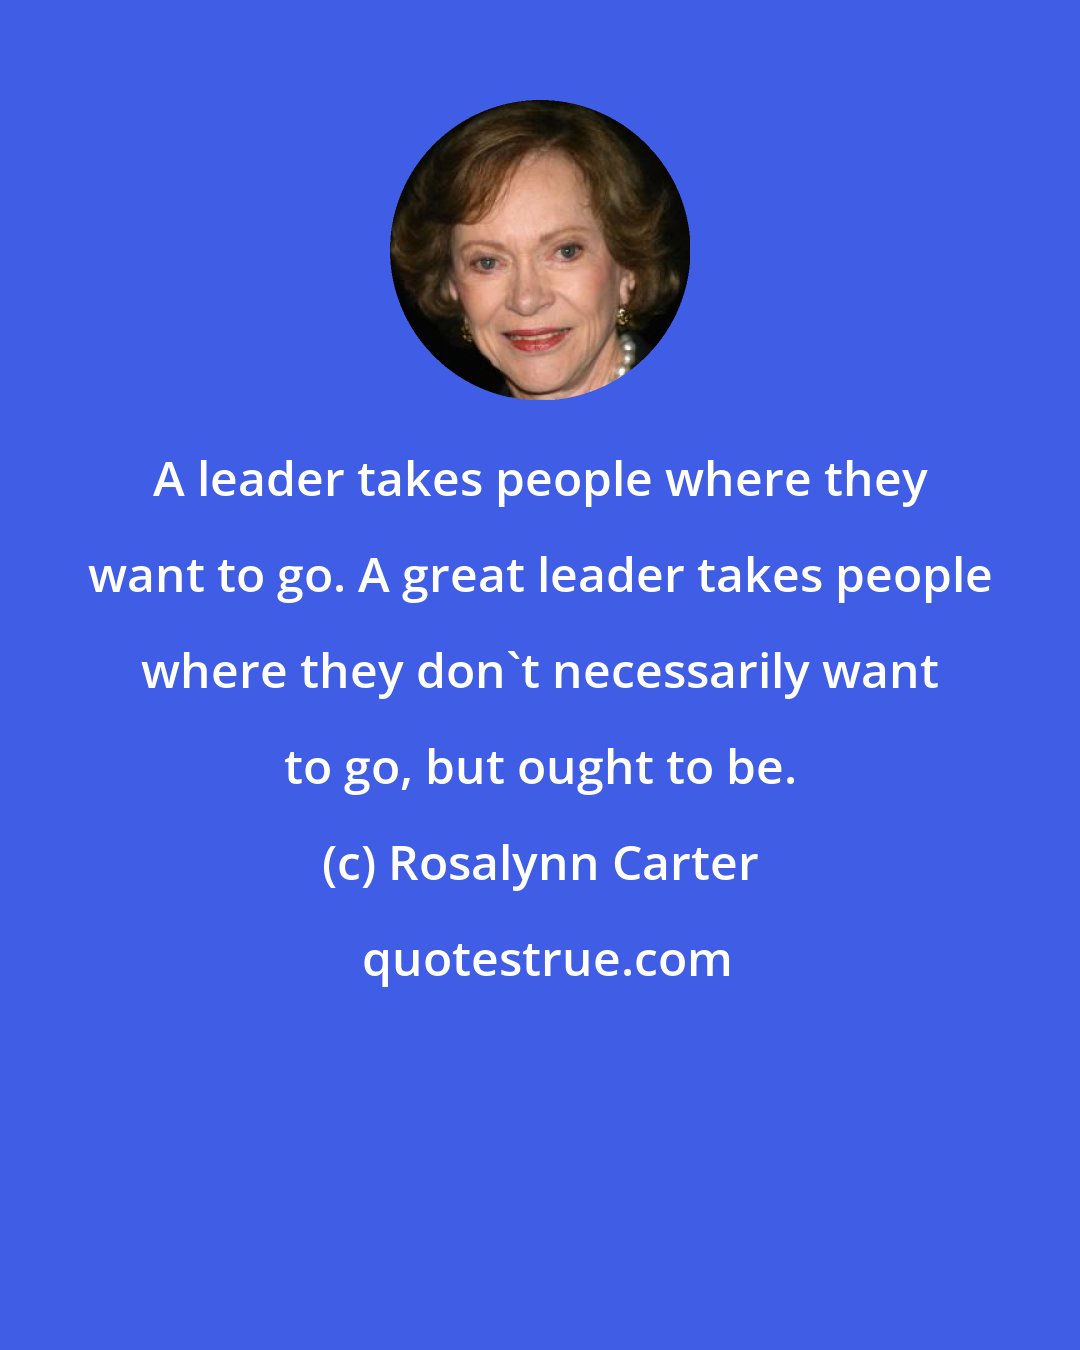 Rosalynn Carter: A leader takes people where they want to go. A great leader takes people where they don't necessarily want to go, but ought to be.